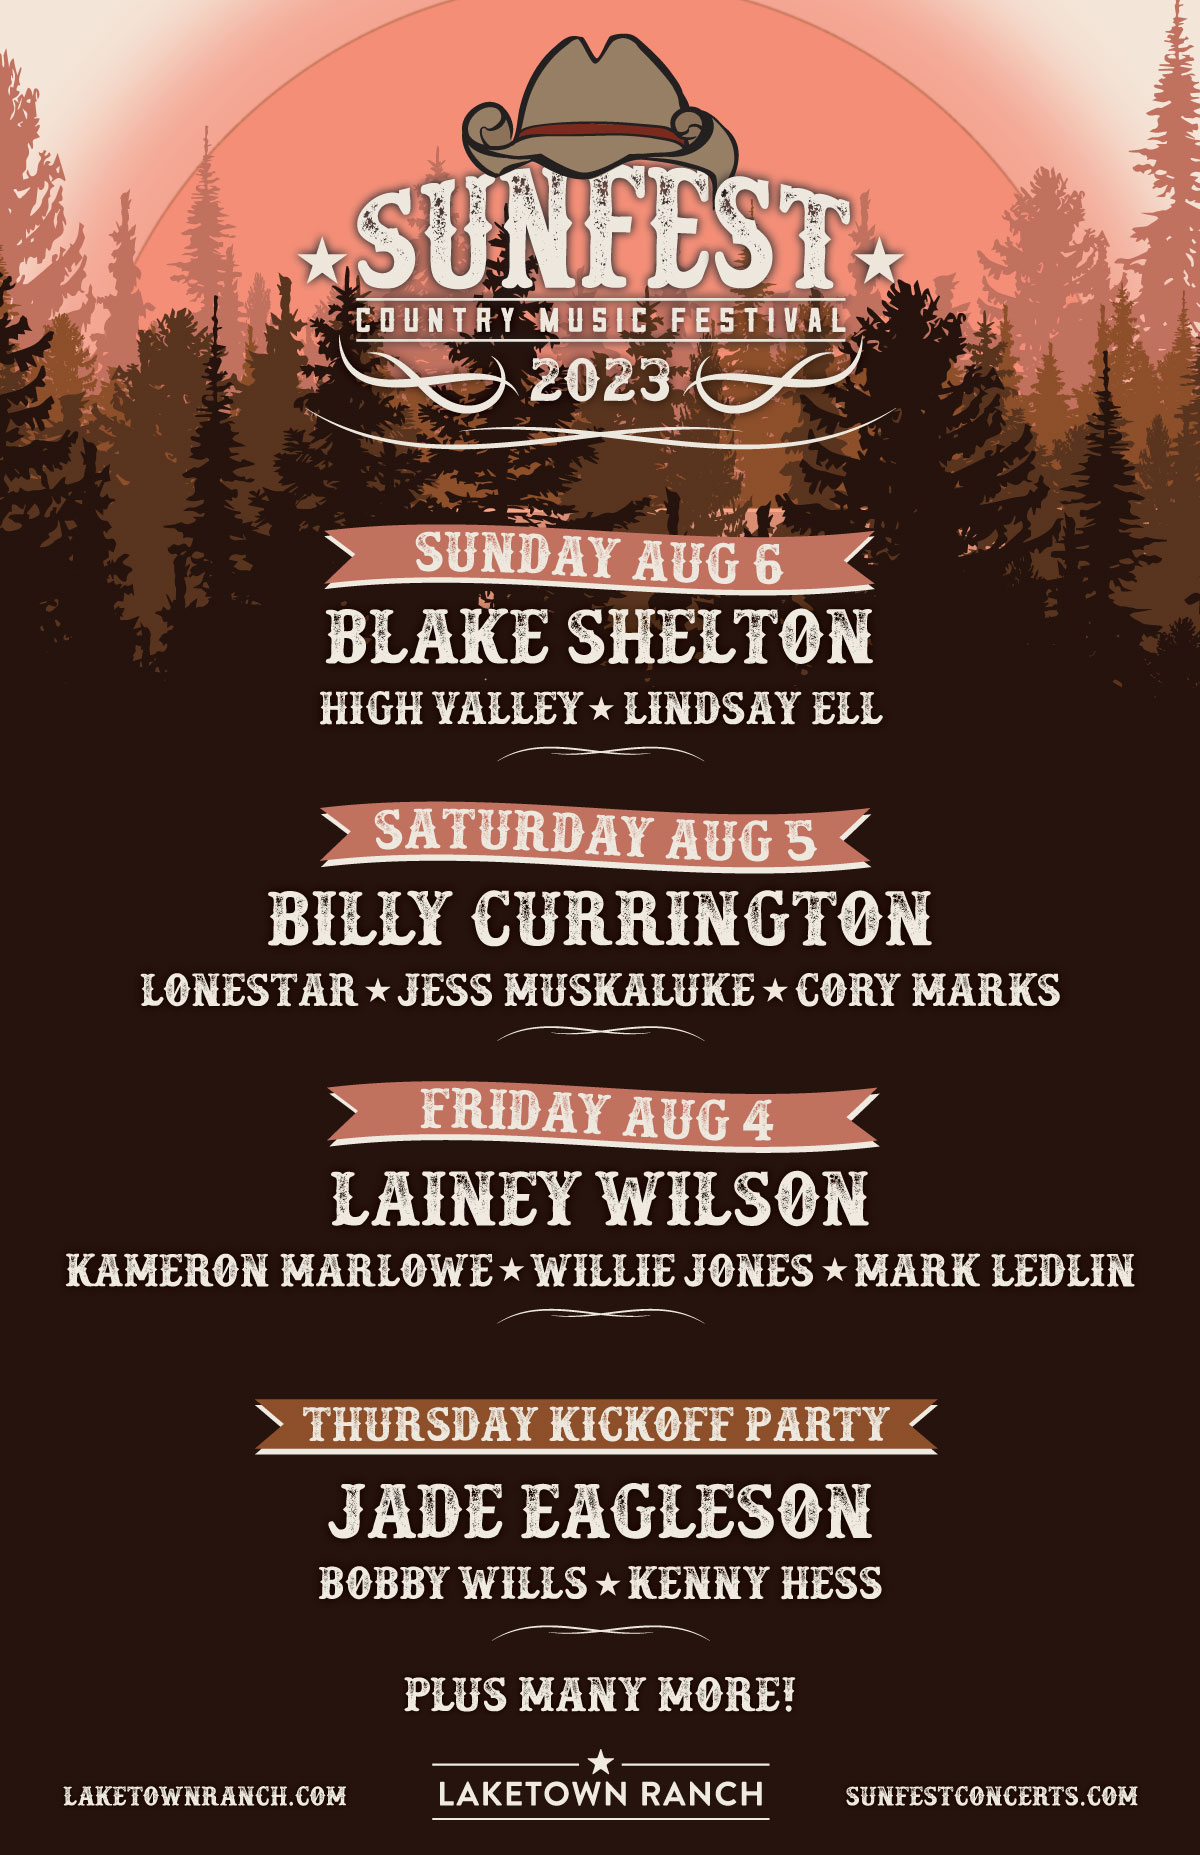 Sunfest Country Music Festival - Cowichan, BC